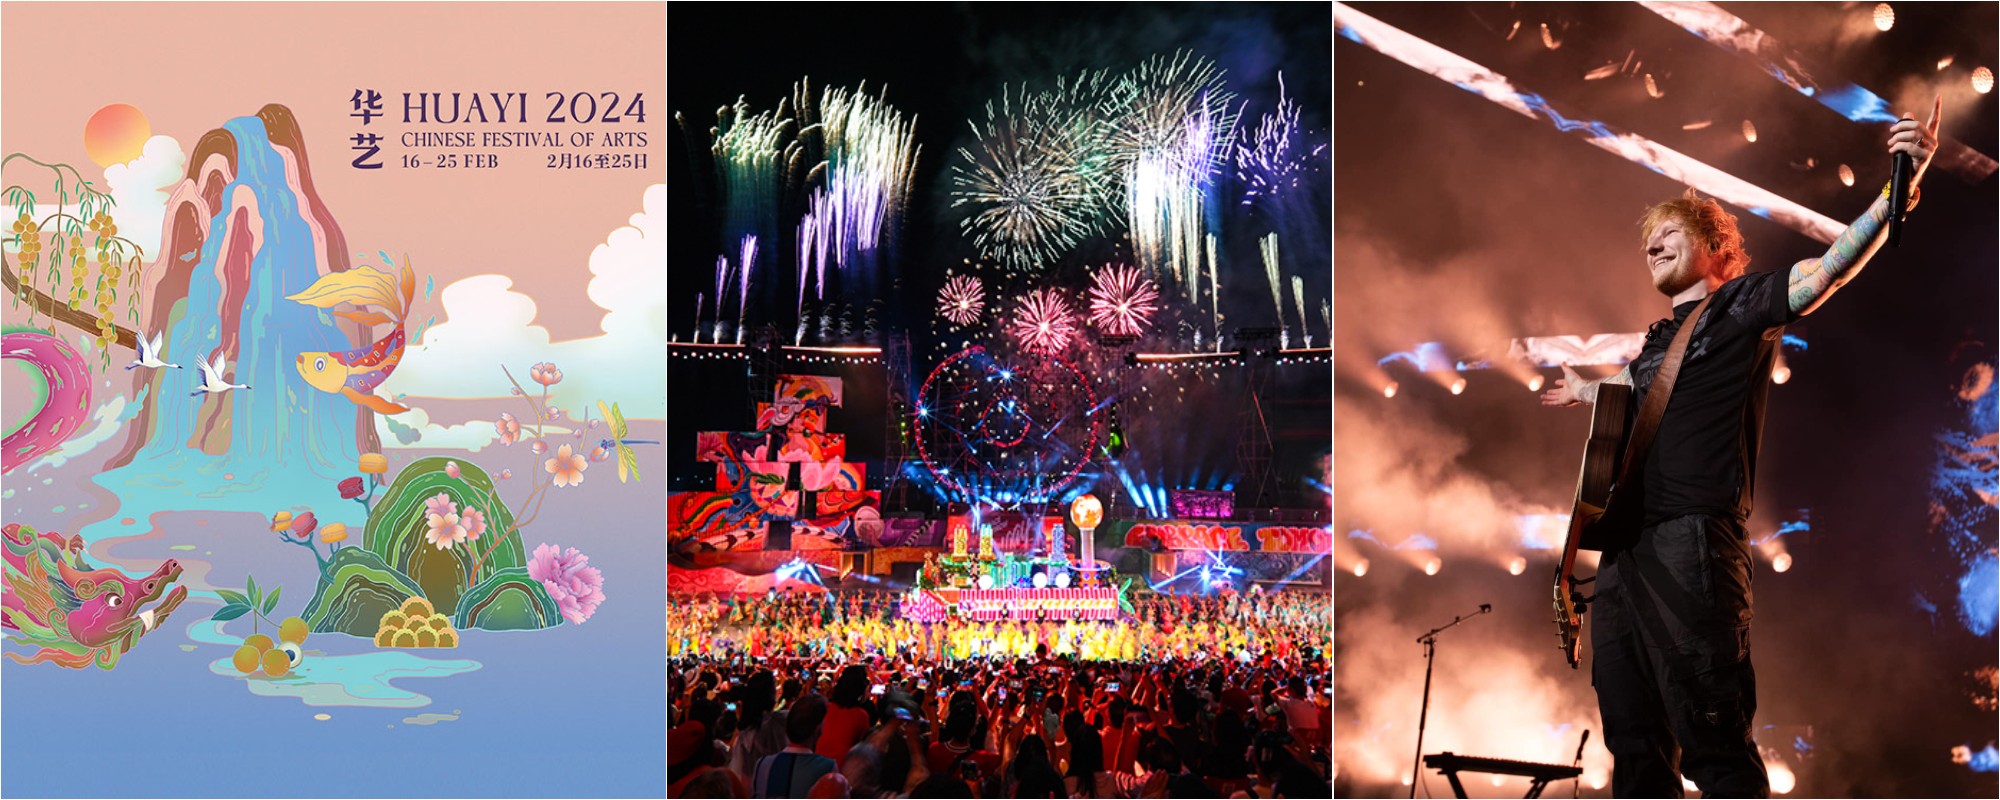 Collage of Huayi: Chinese Festival of Arts 2024, Chingay 2023, and Ed Sheeran (left to right)